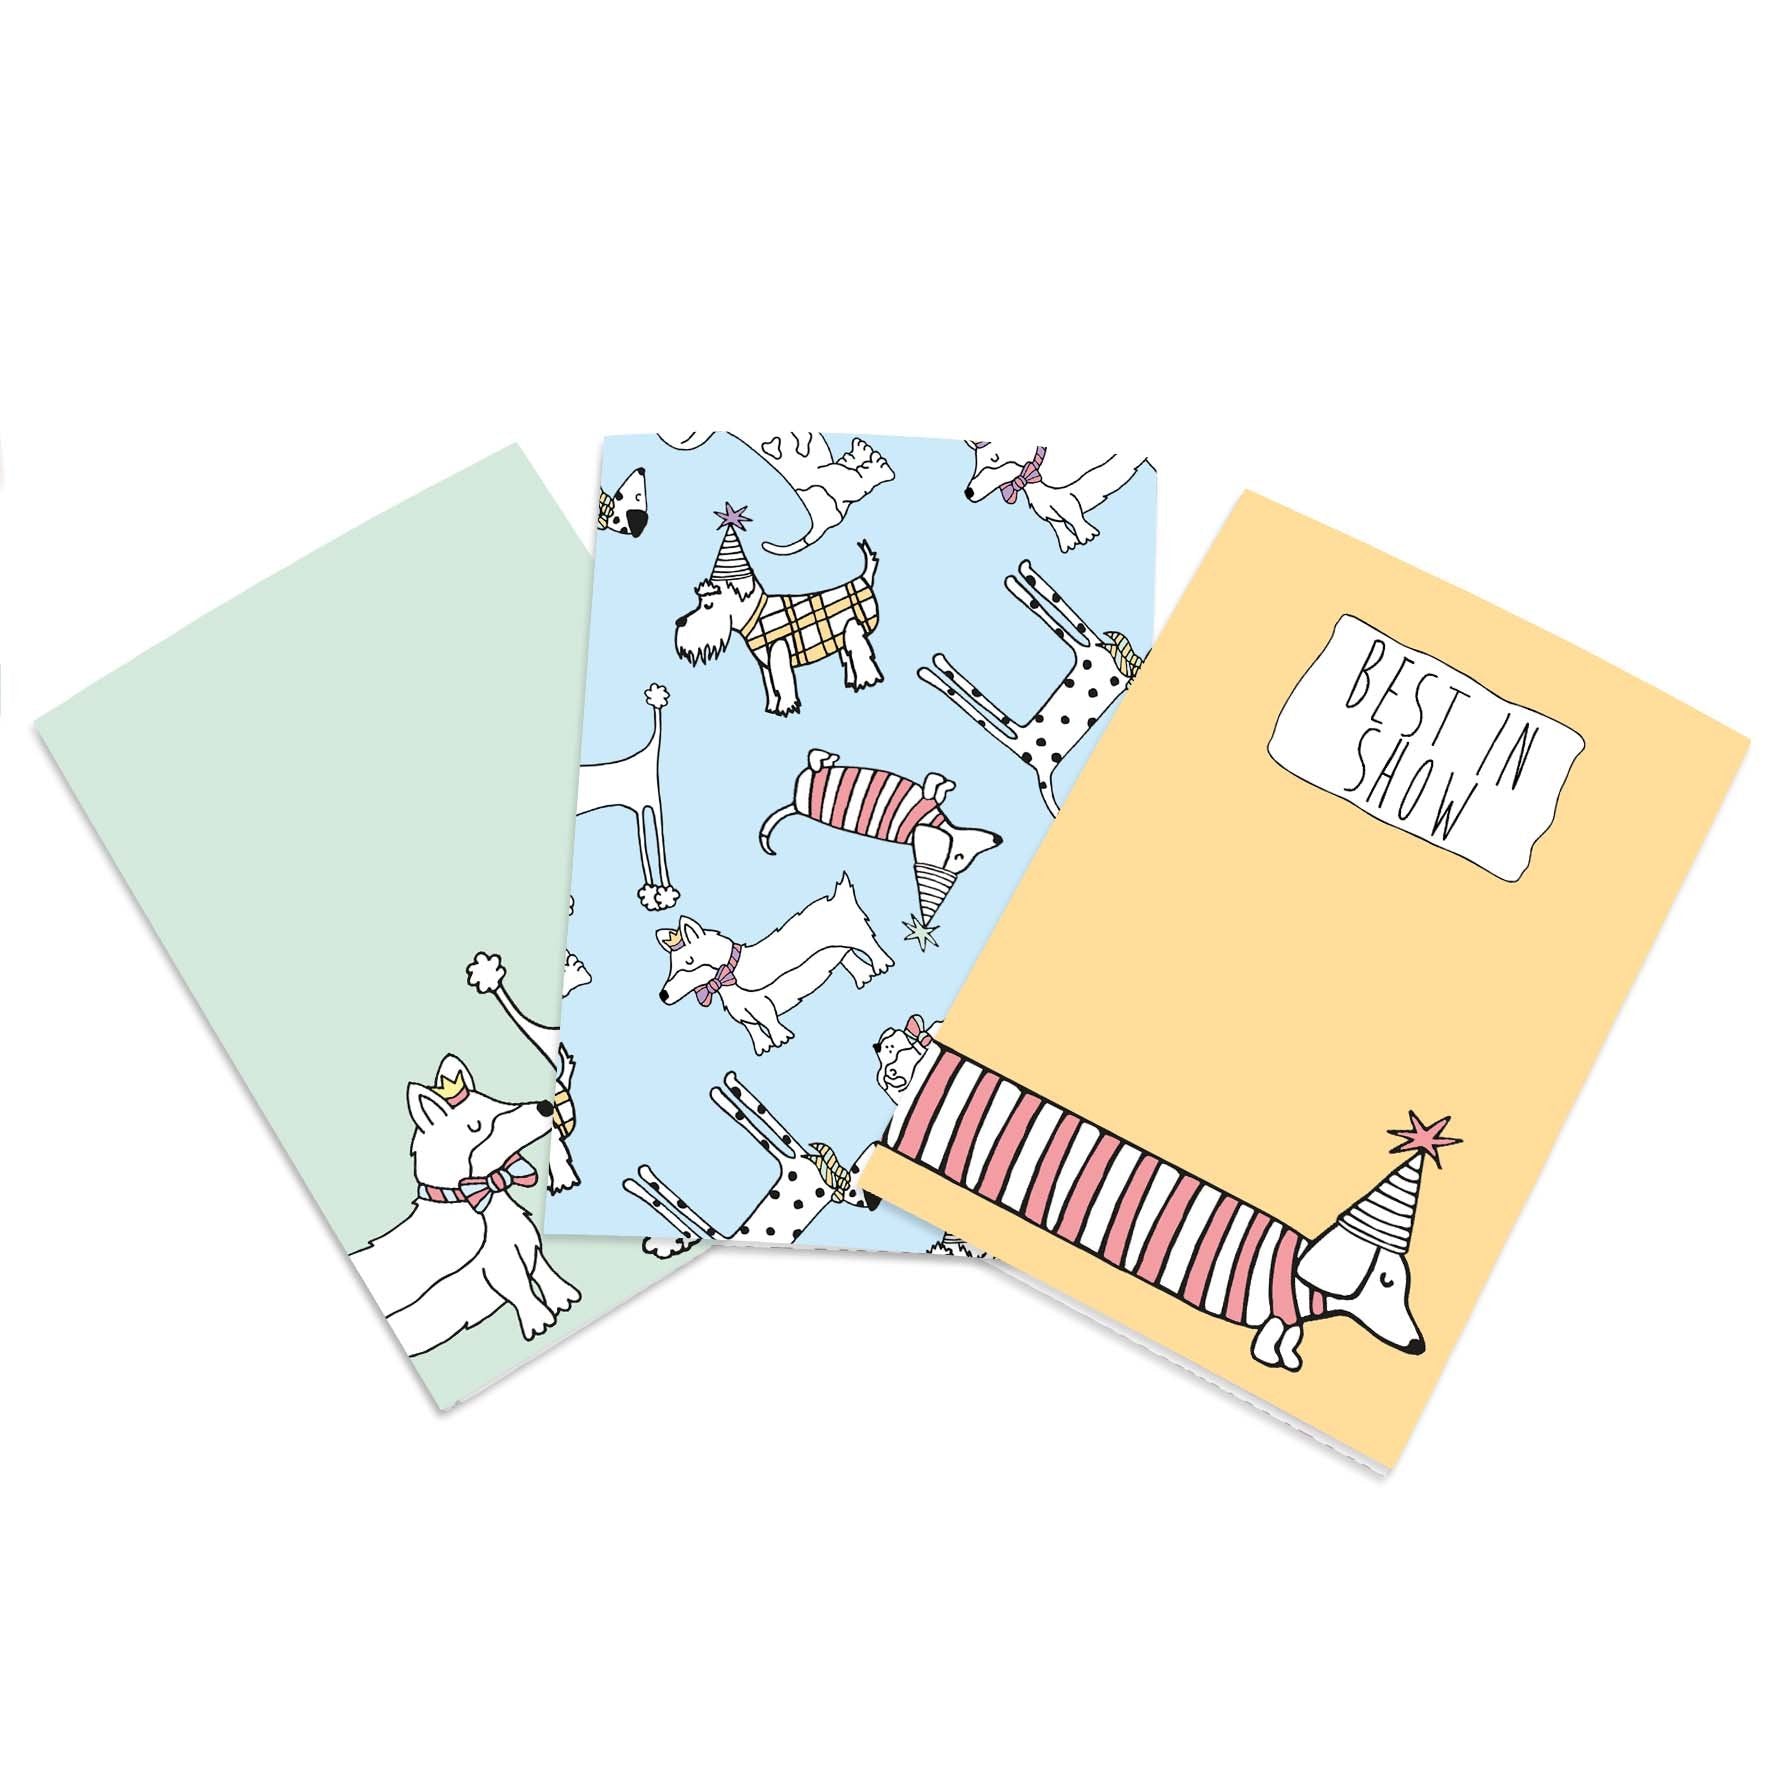 A6 illustrated dog notebook set. Green, blue and orange notebooks